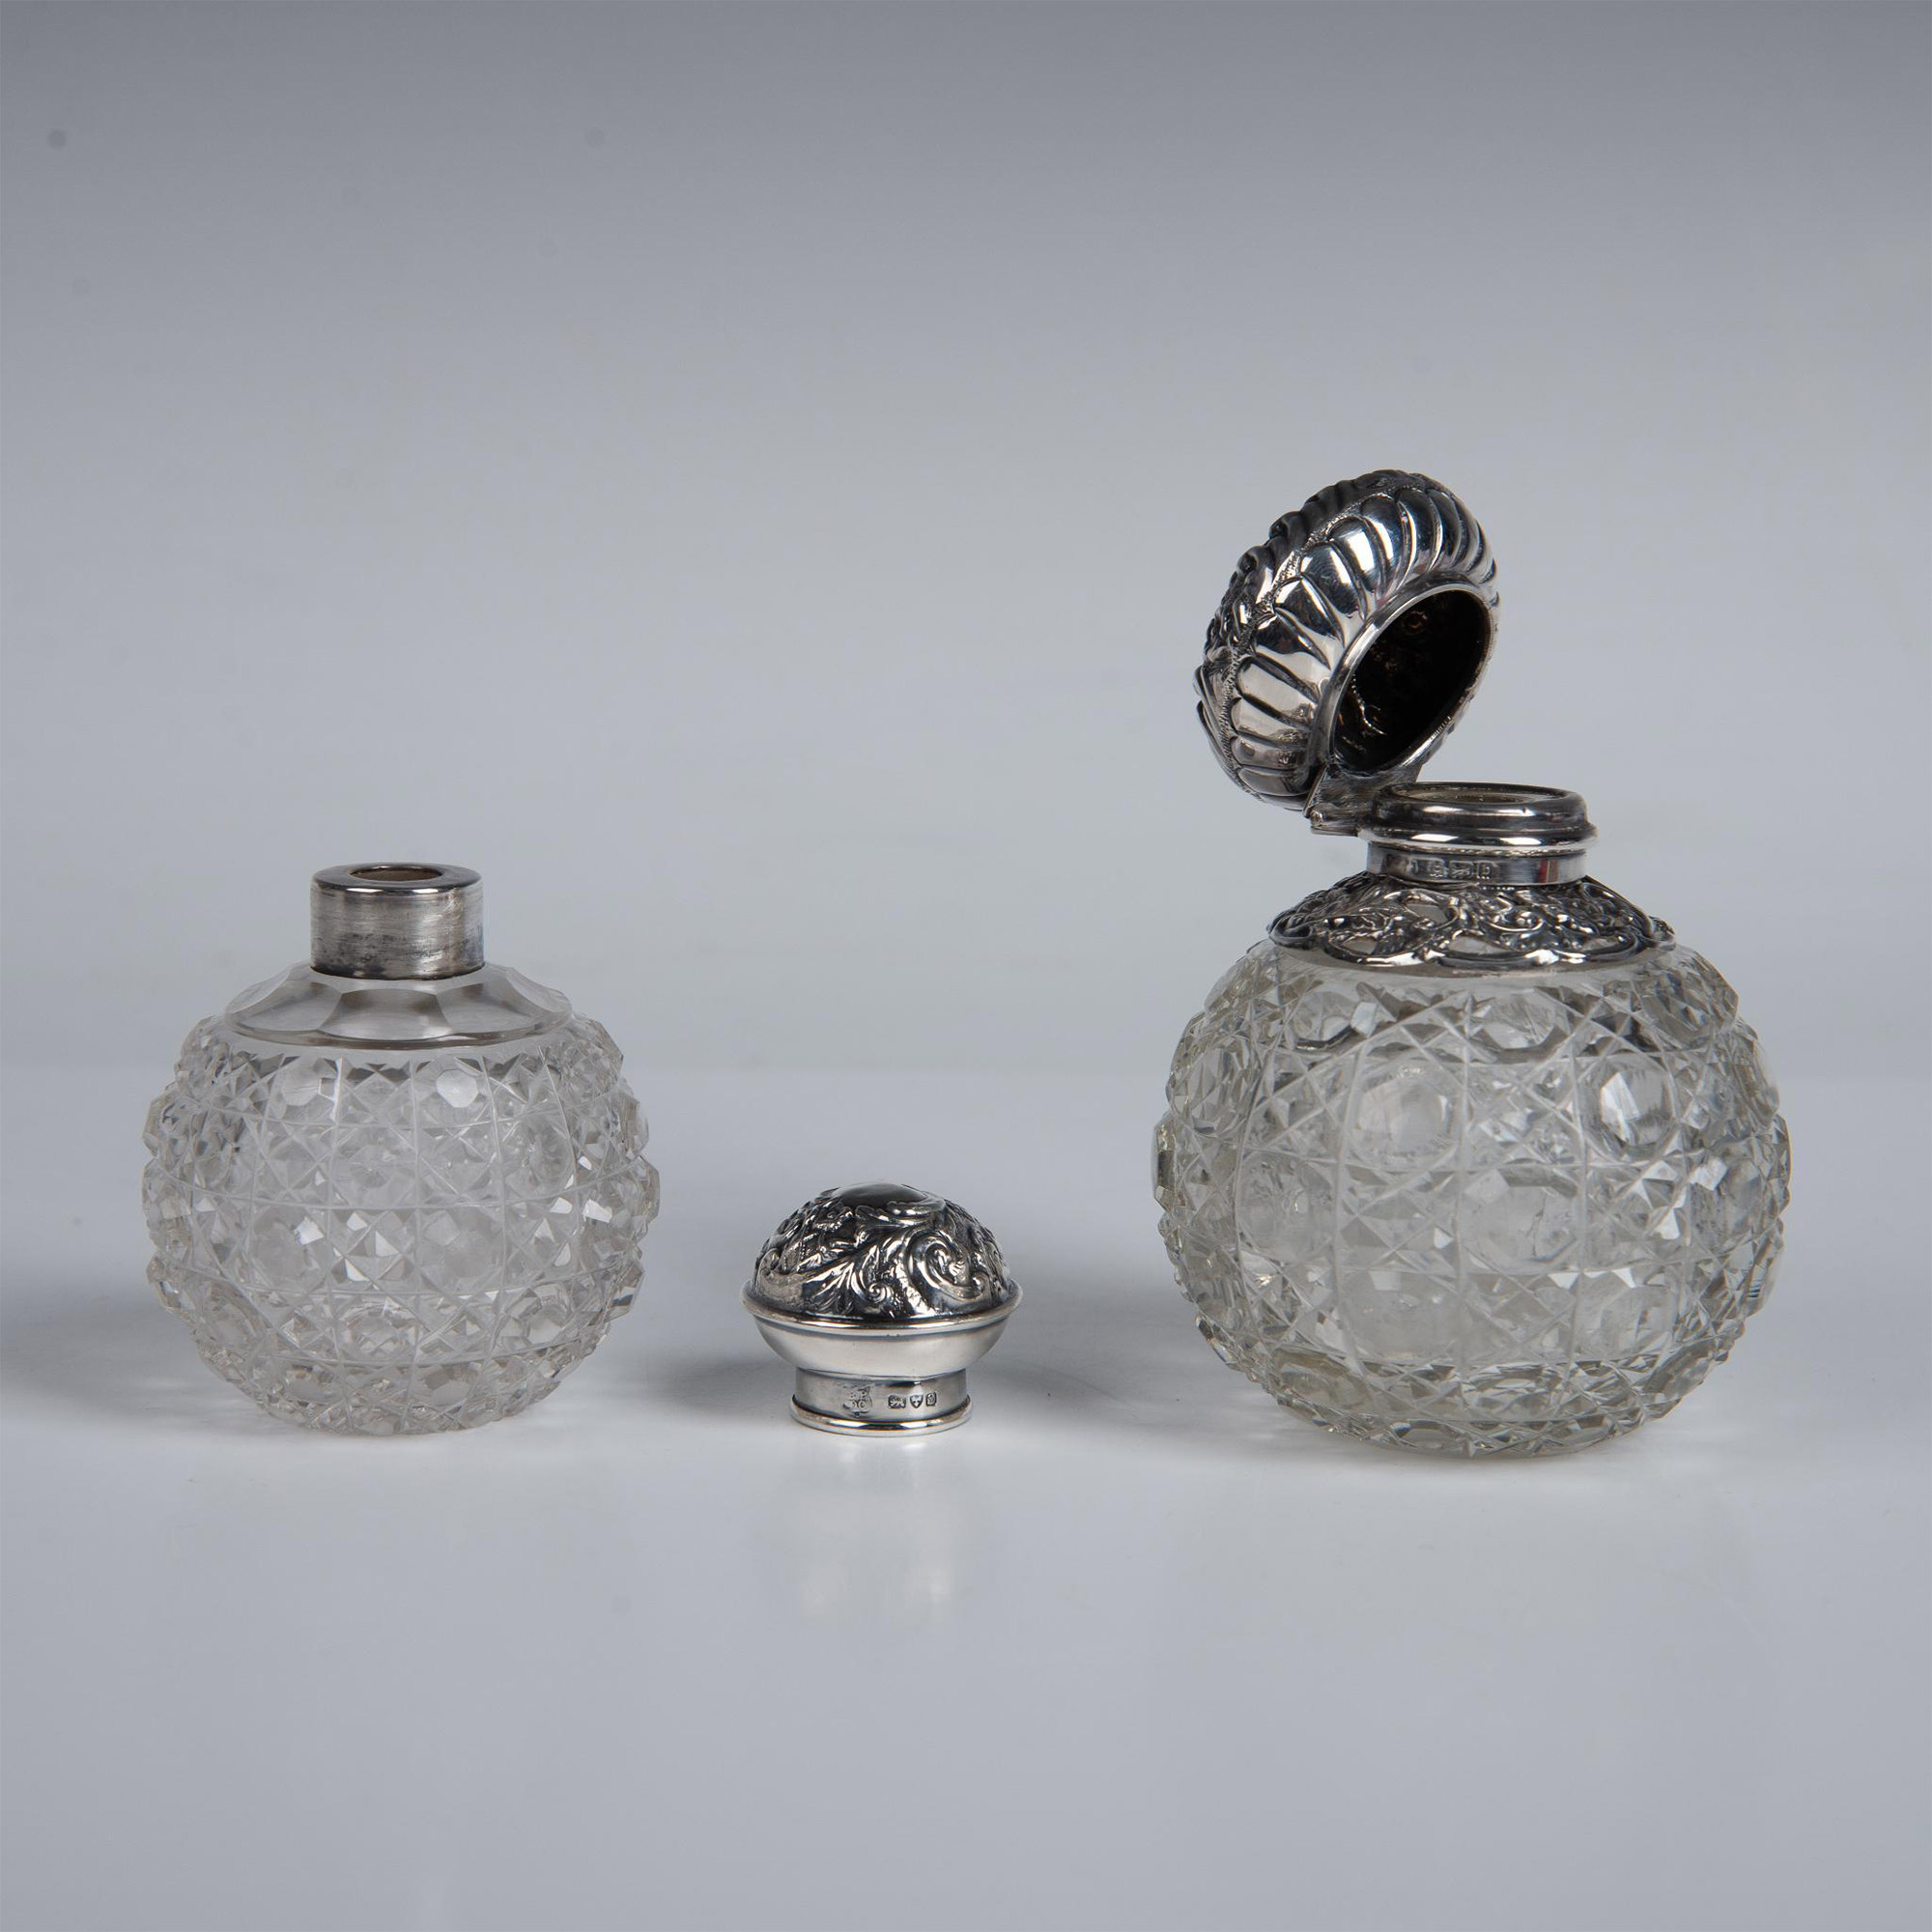 2pc Antique English Cut Crystal and Sterling Scent Bottles - Image 2 of 4